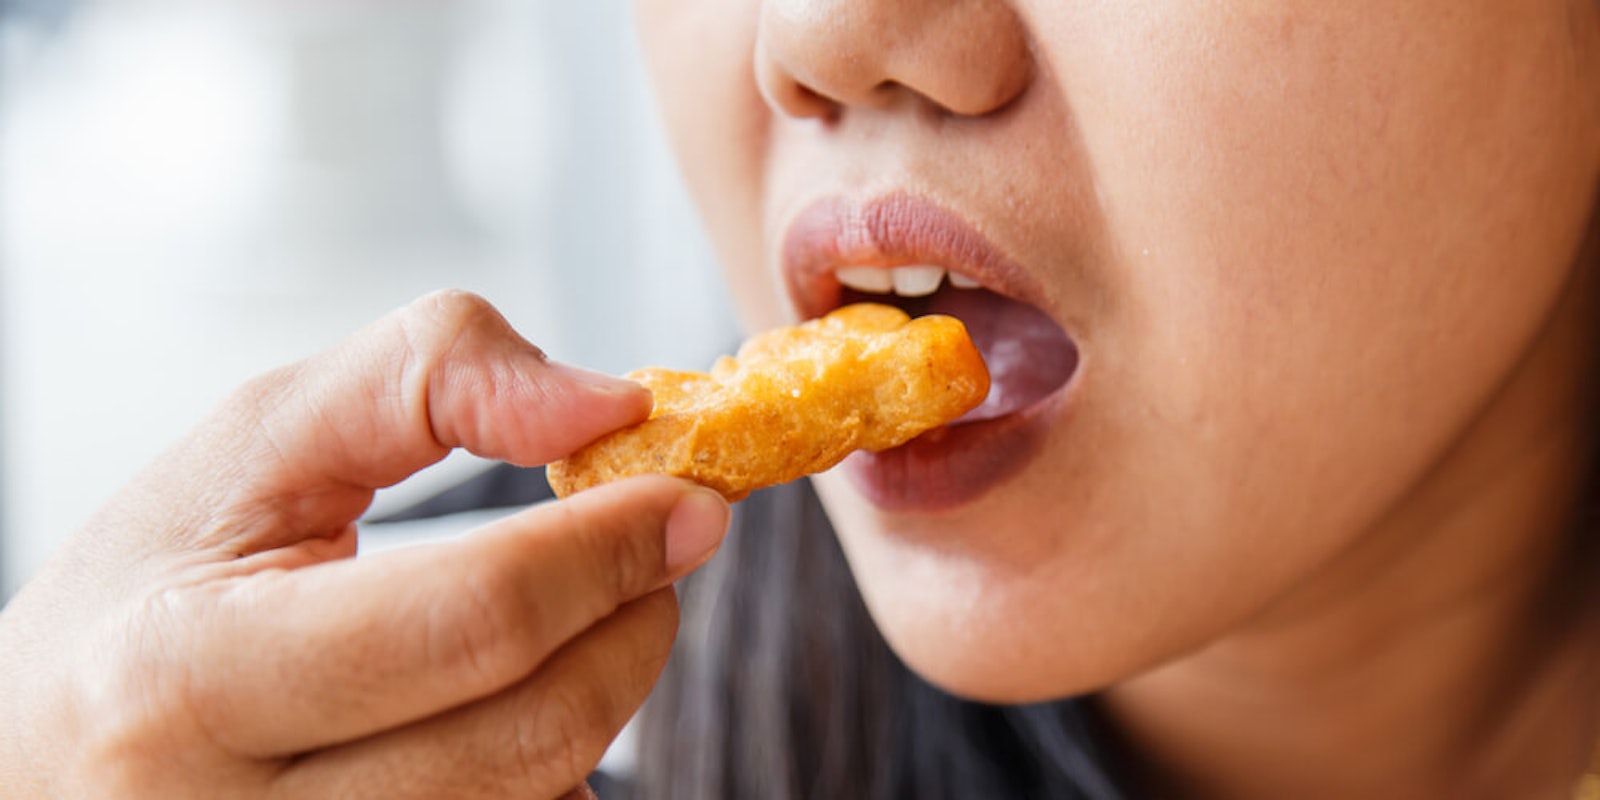 woman eating chicken nugget - vegan reddit am i the asshole